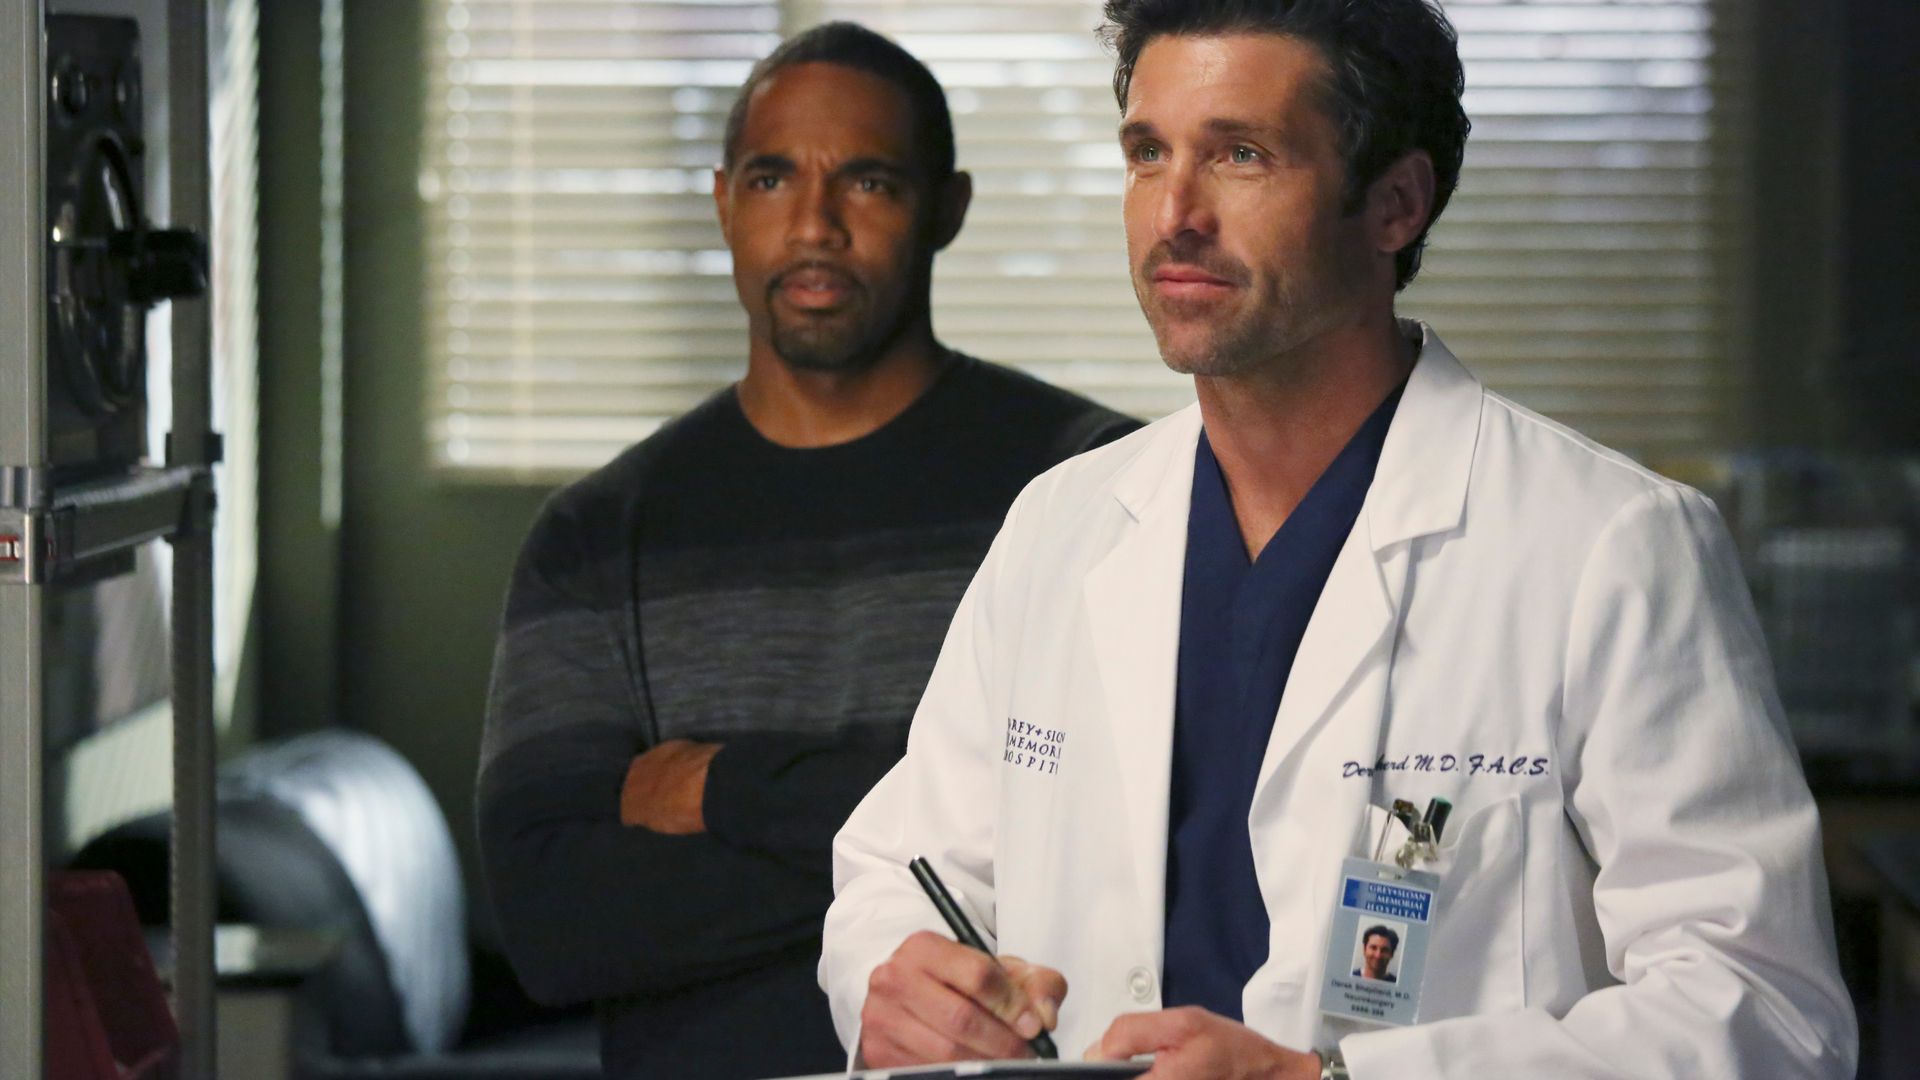 Why did Patrick Dempsey leave Grey's Anatomy?